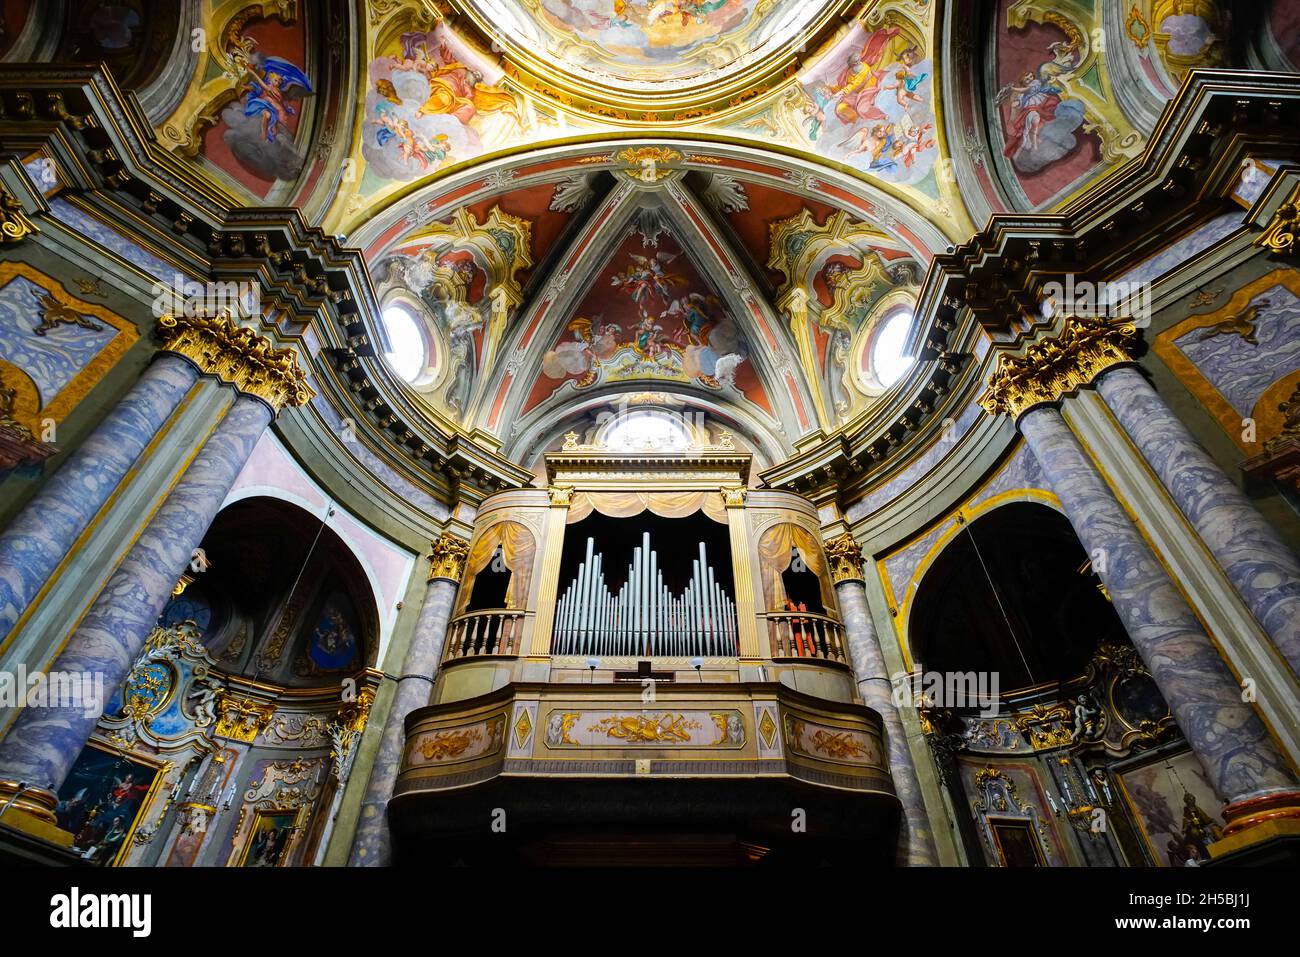 Inside St. Ambrogio church in Cuneo. The Capital city of  Cuneo province, Piedmont region, Italy. The organ was built by the Lingiardi brothers from P Stock Photo